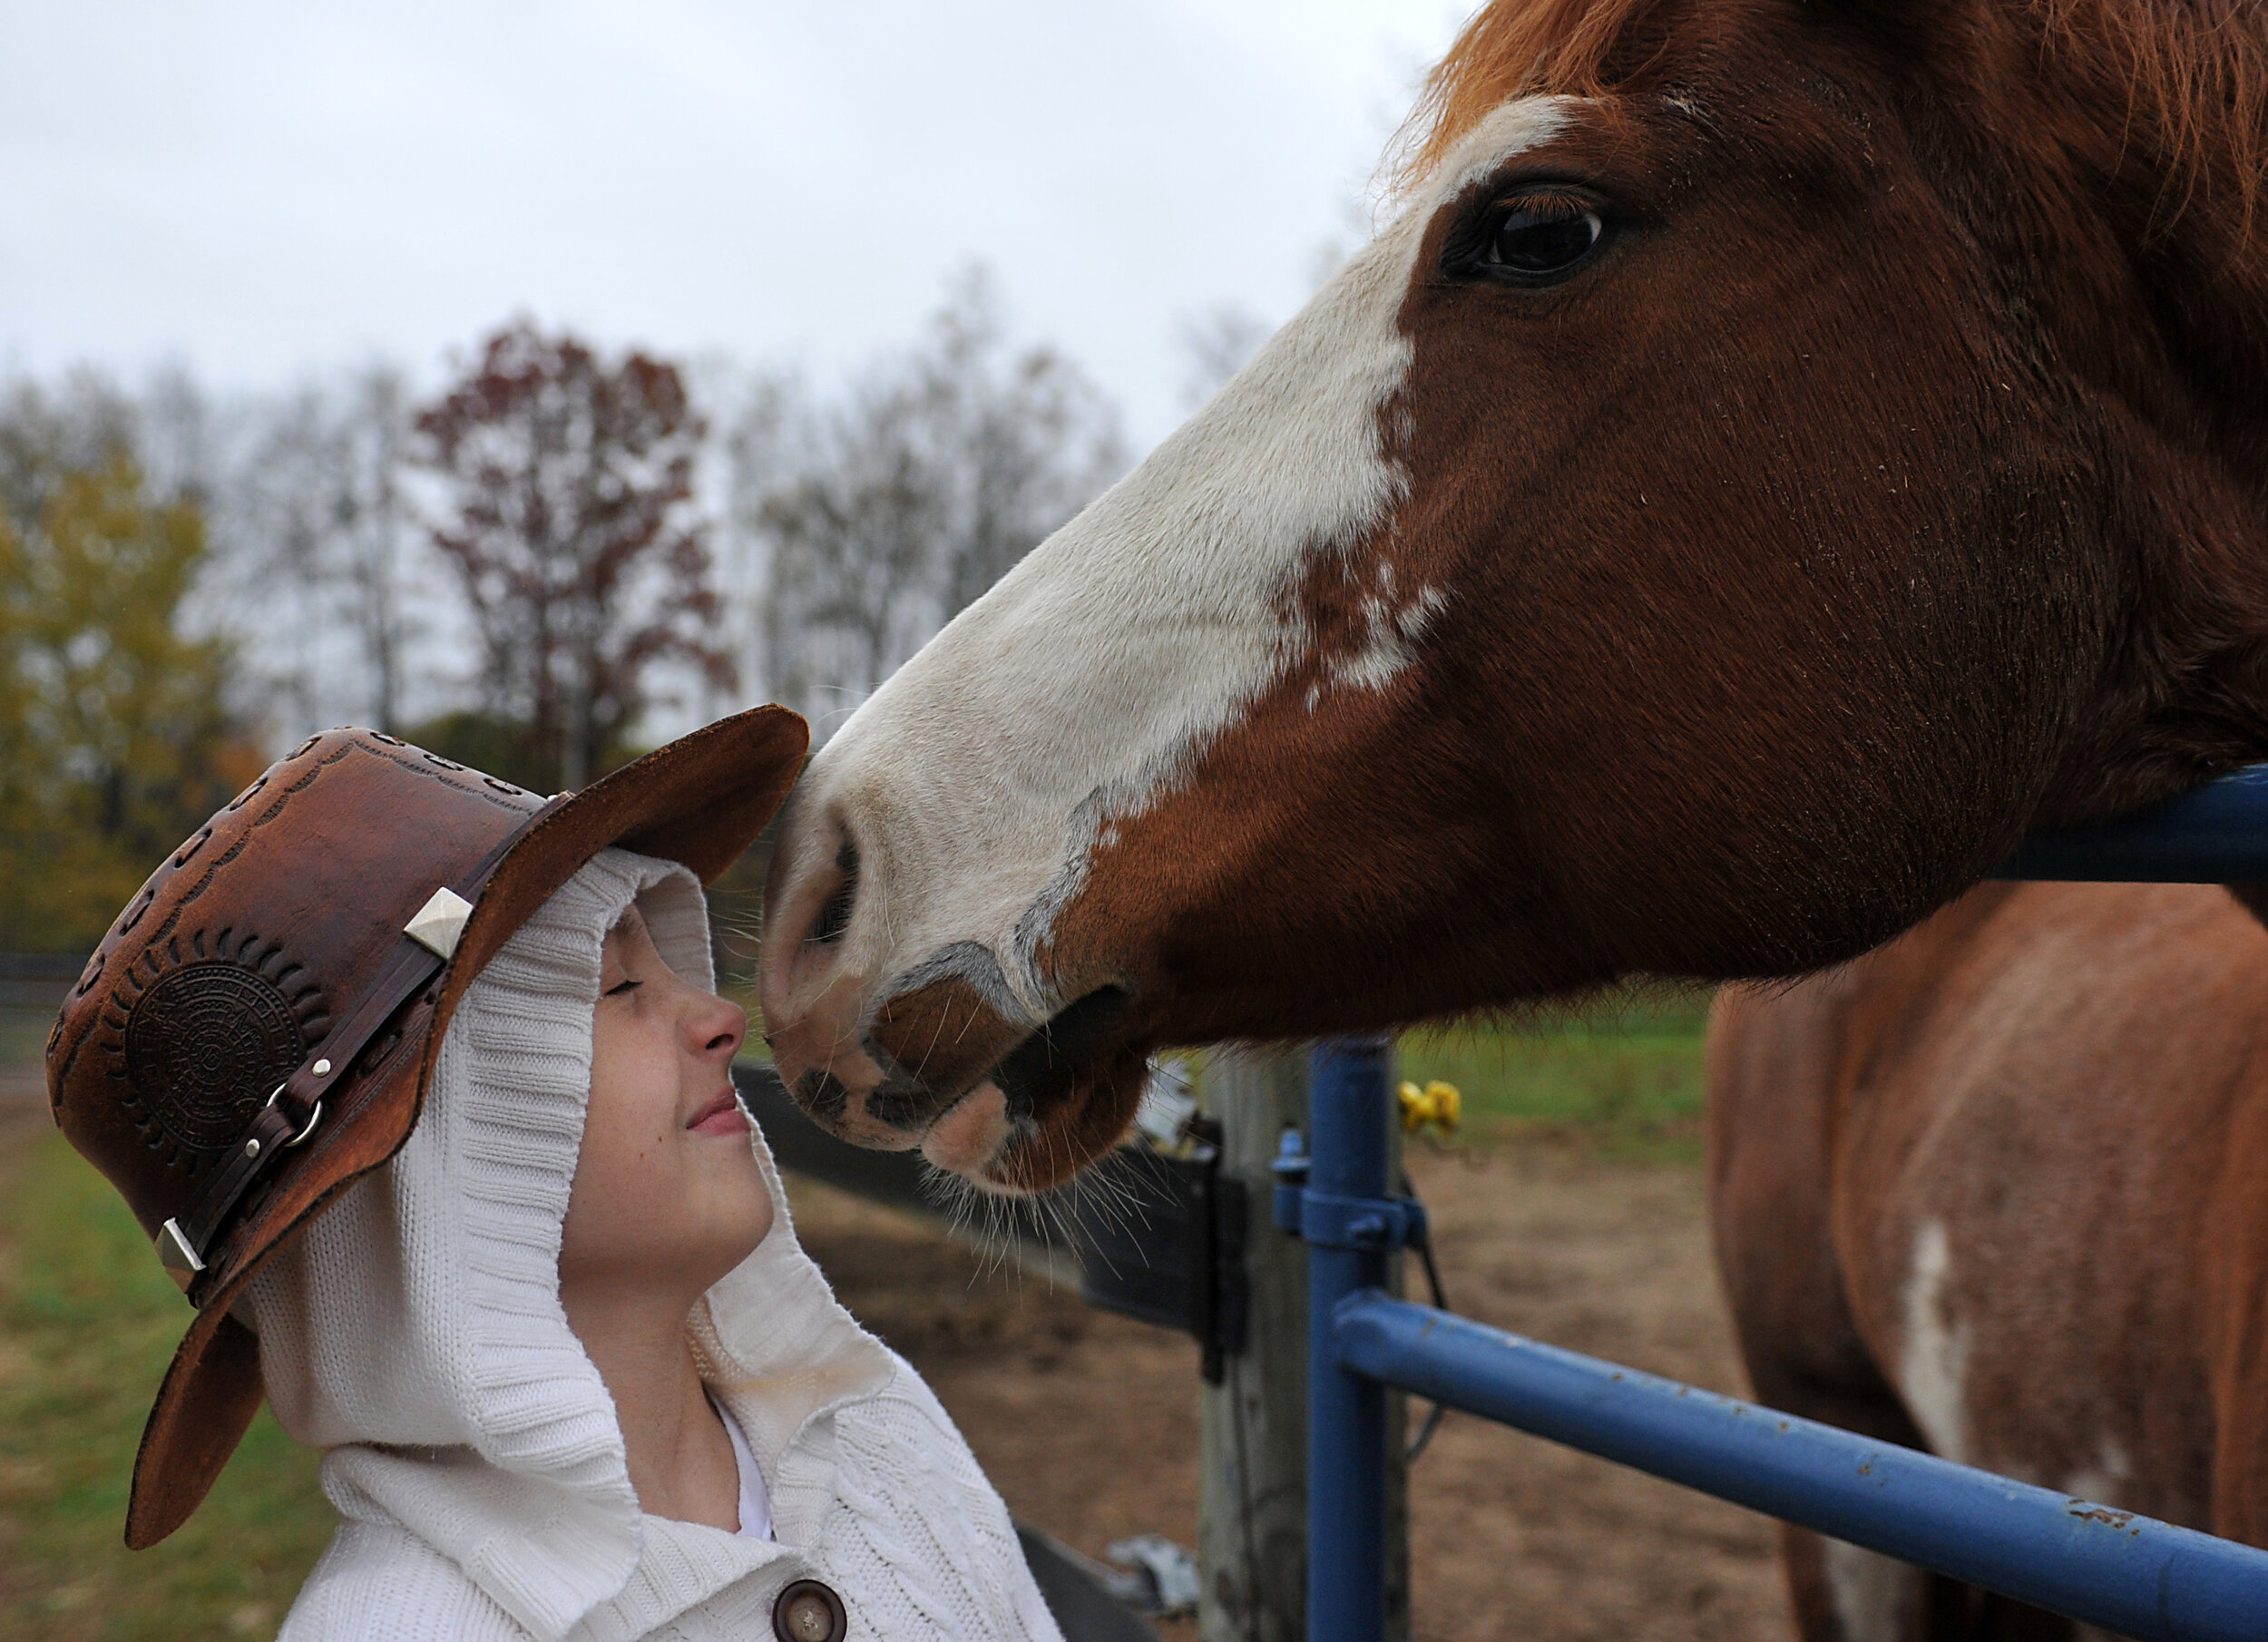  Maddie Tomasko, 11, gets a kiss on her nose from Apple Cyder Wednesday, Oct. 26, near Cedar Springs. Tomasko had a bone marrow transplant in June after being diagnosed with leukemia and received Apple Cyder in July when a volunteer at Helen DeVos Ch